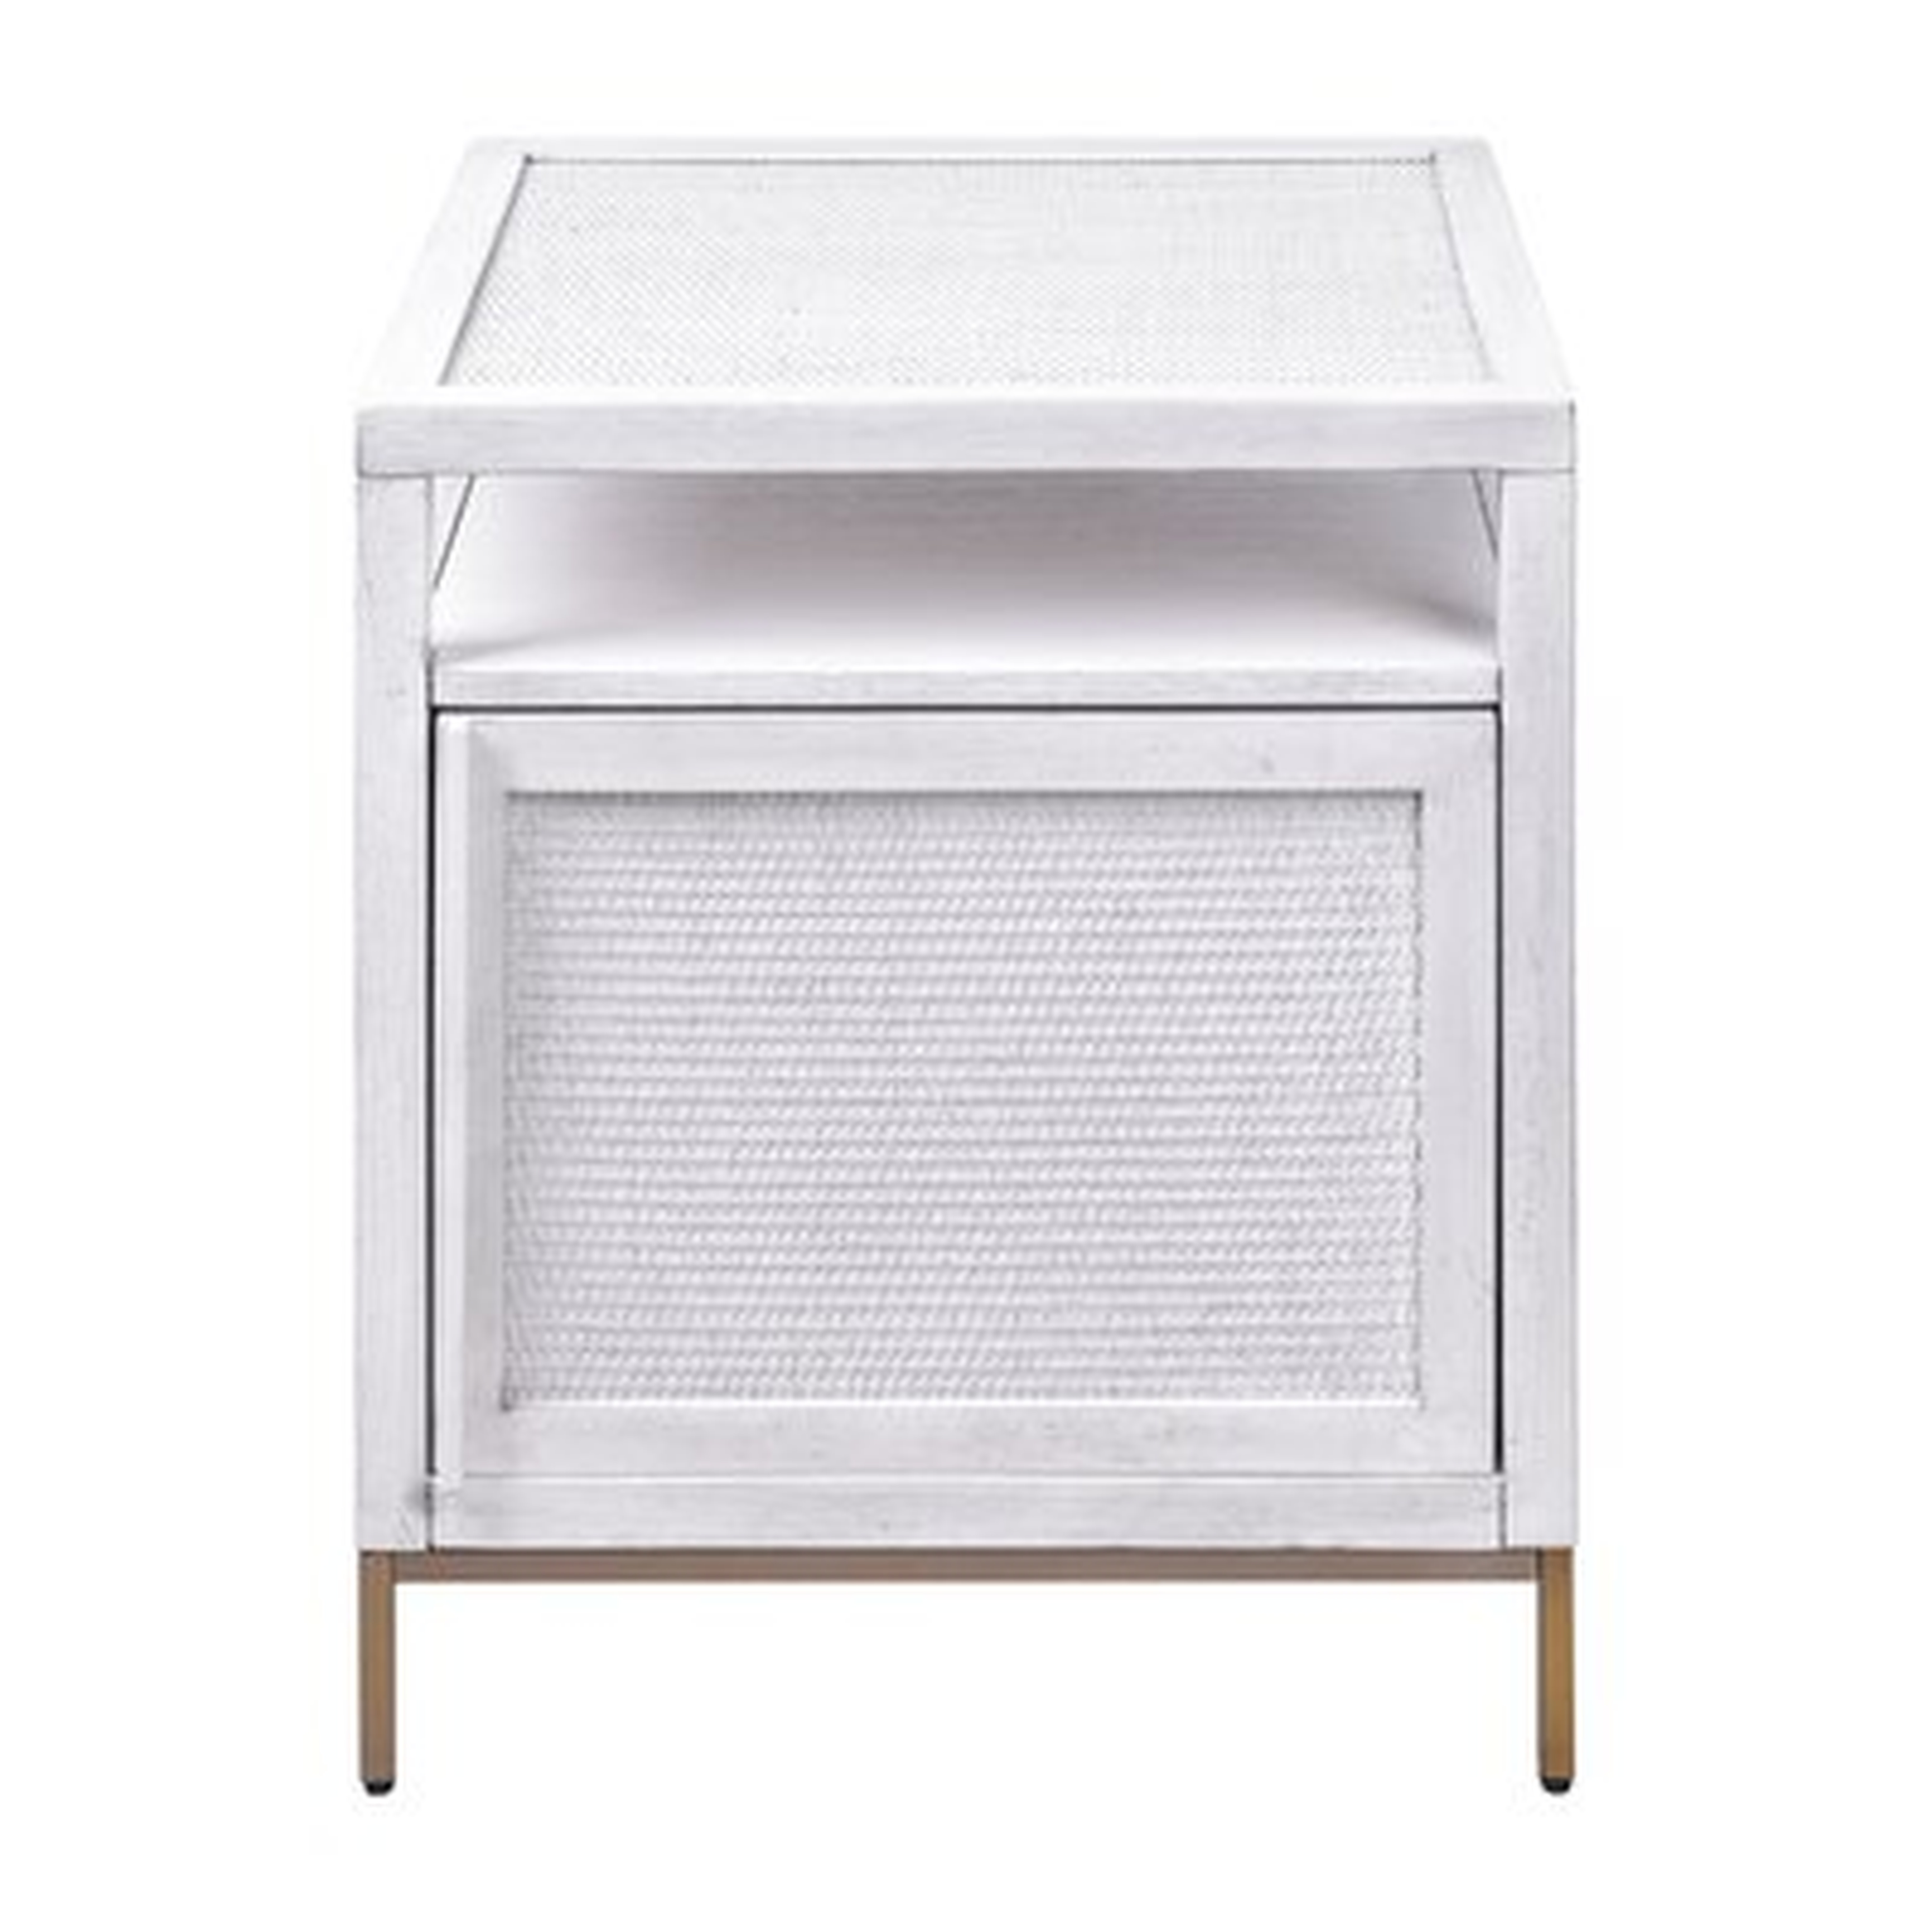 Delancey End Table with Storage - Wayfair